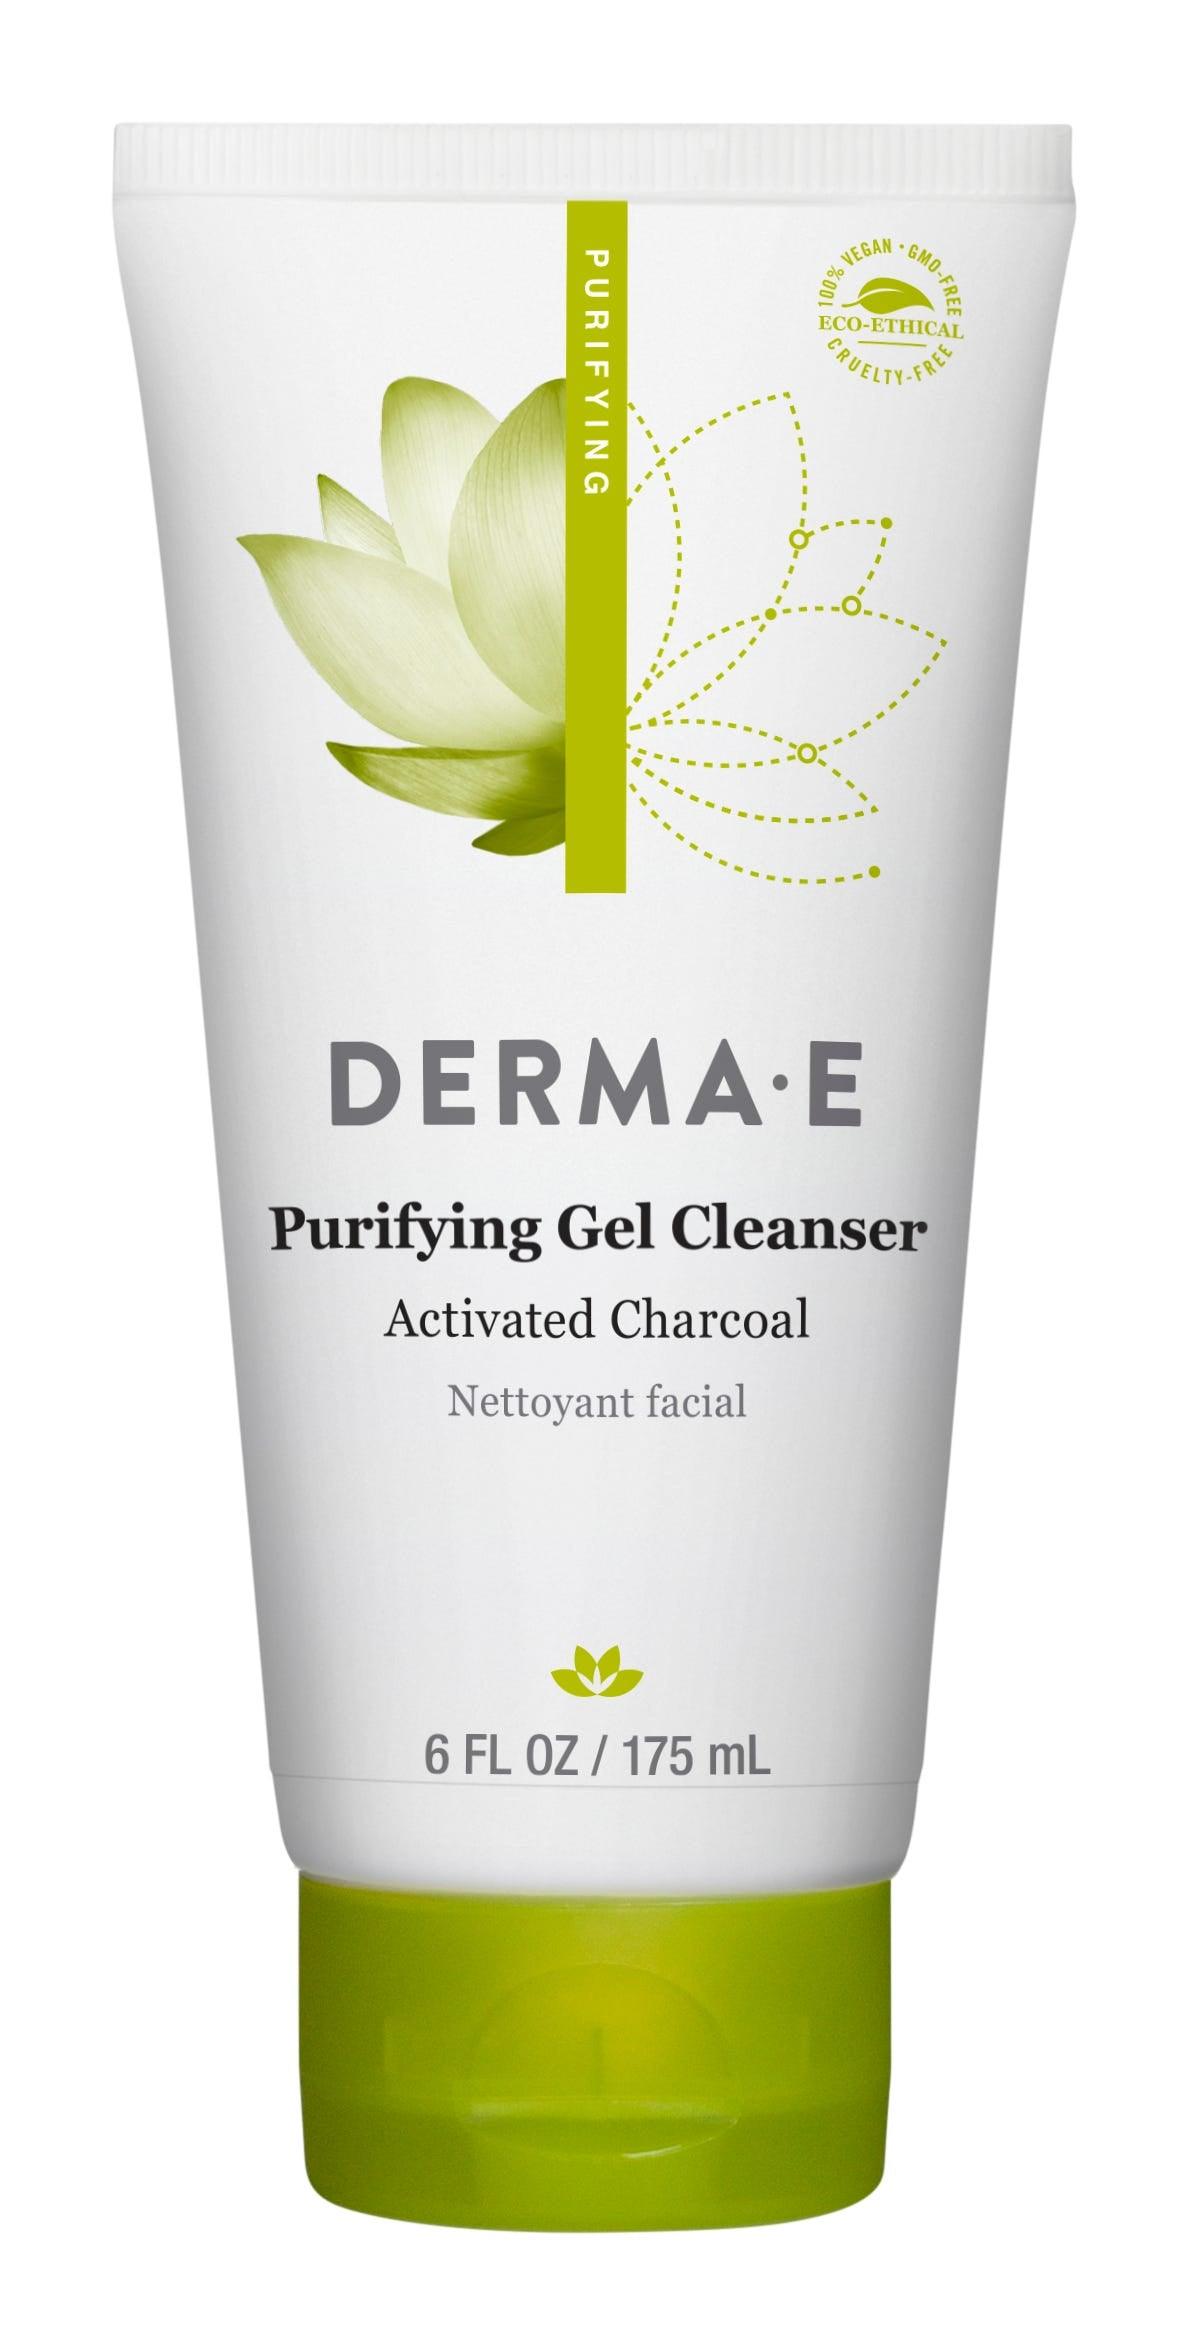 Derma E Activated Charcoal Purifying Gel Cleanser - 175ml